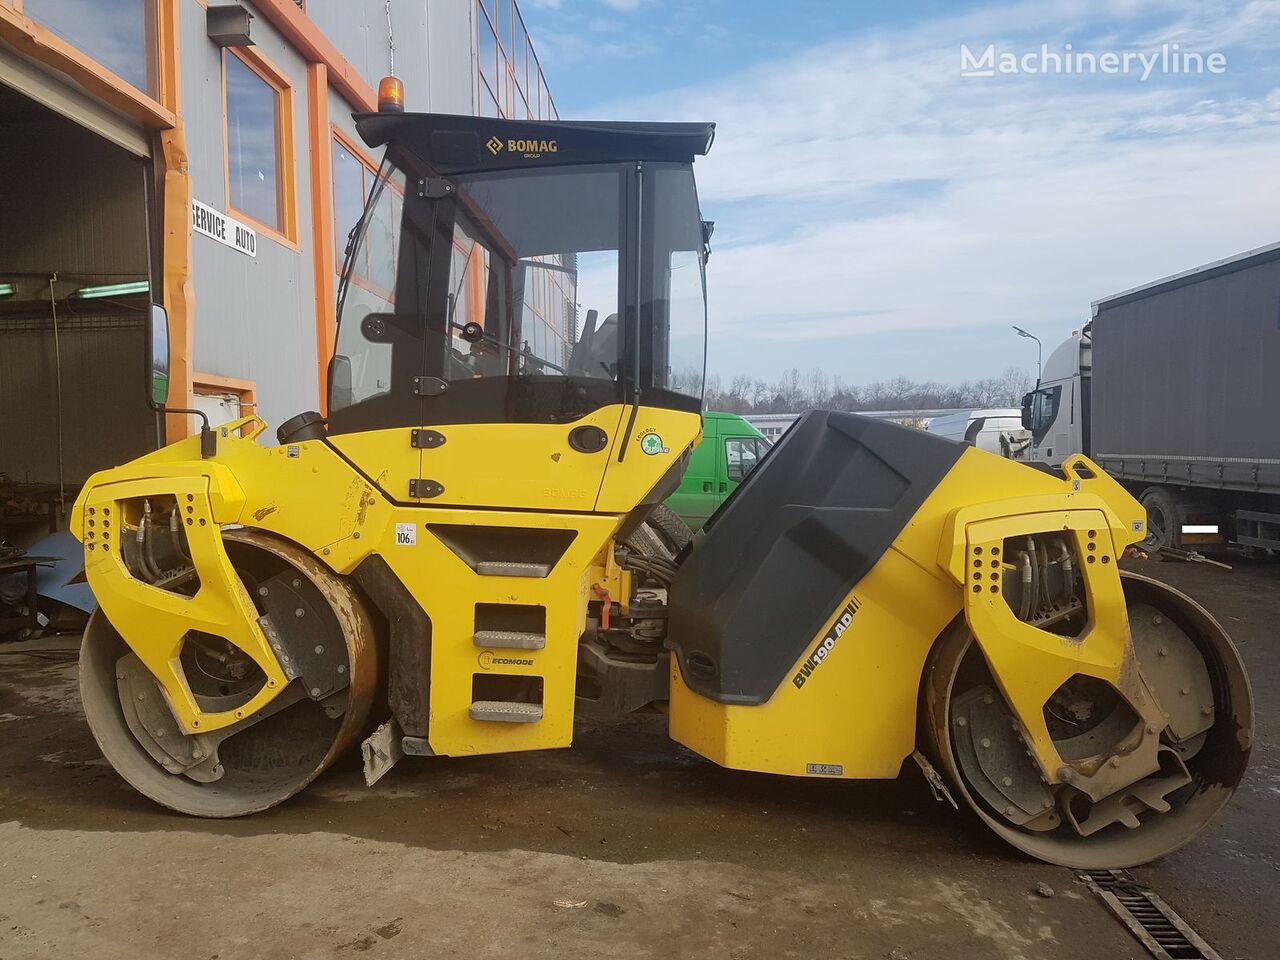 BOMAG BW 190 AD5 road roller